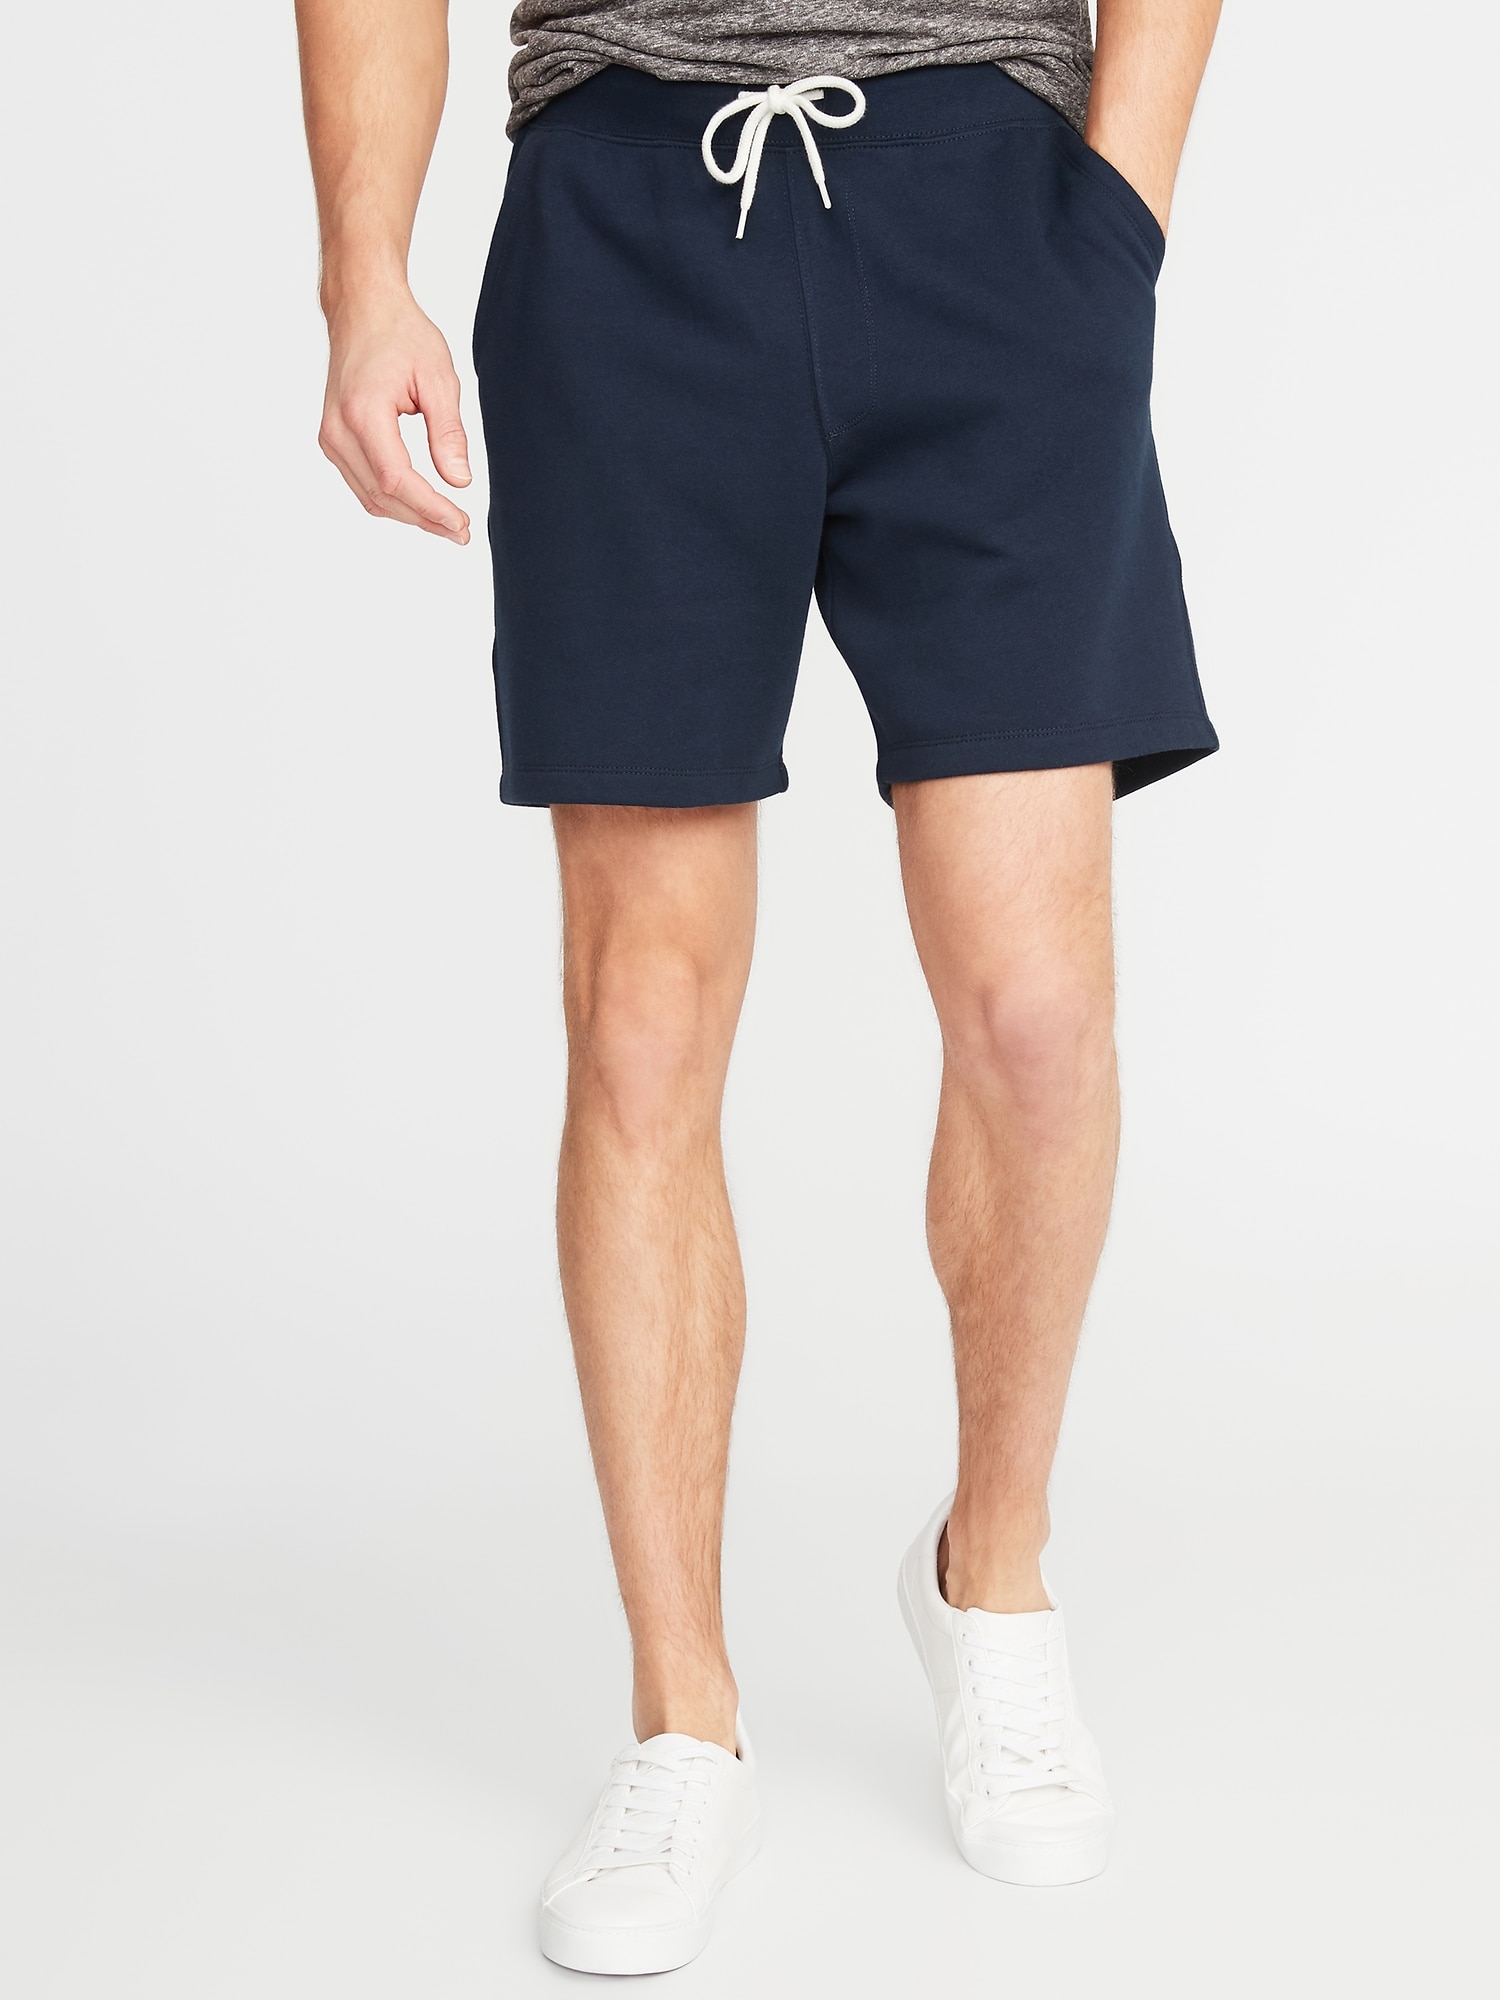 Soft-Washed Jogger Shorts for Men - 7.5-inch inseam | Old Navy